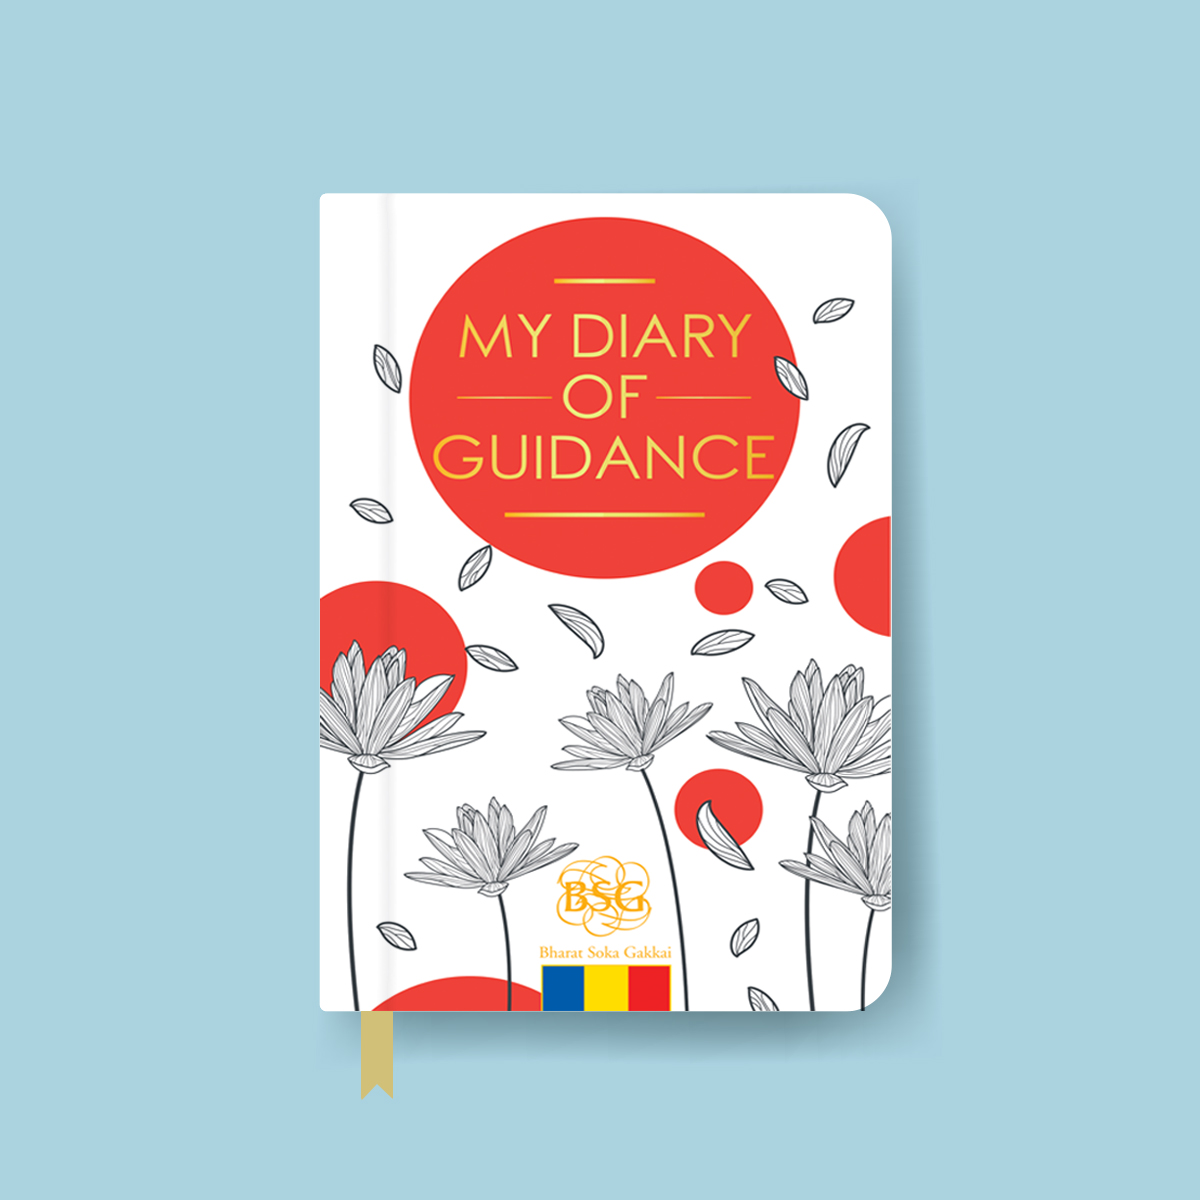 My Diary of Guidance